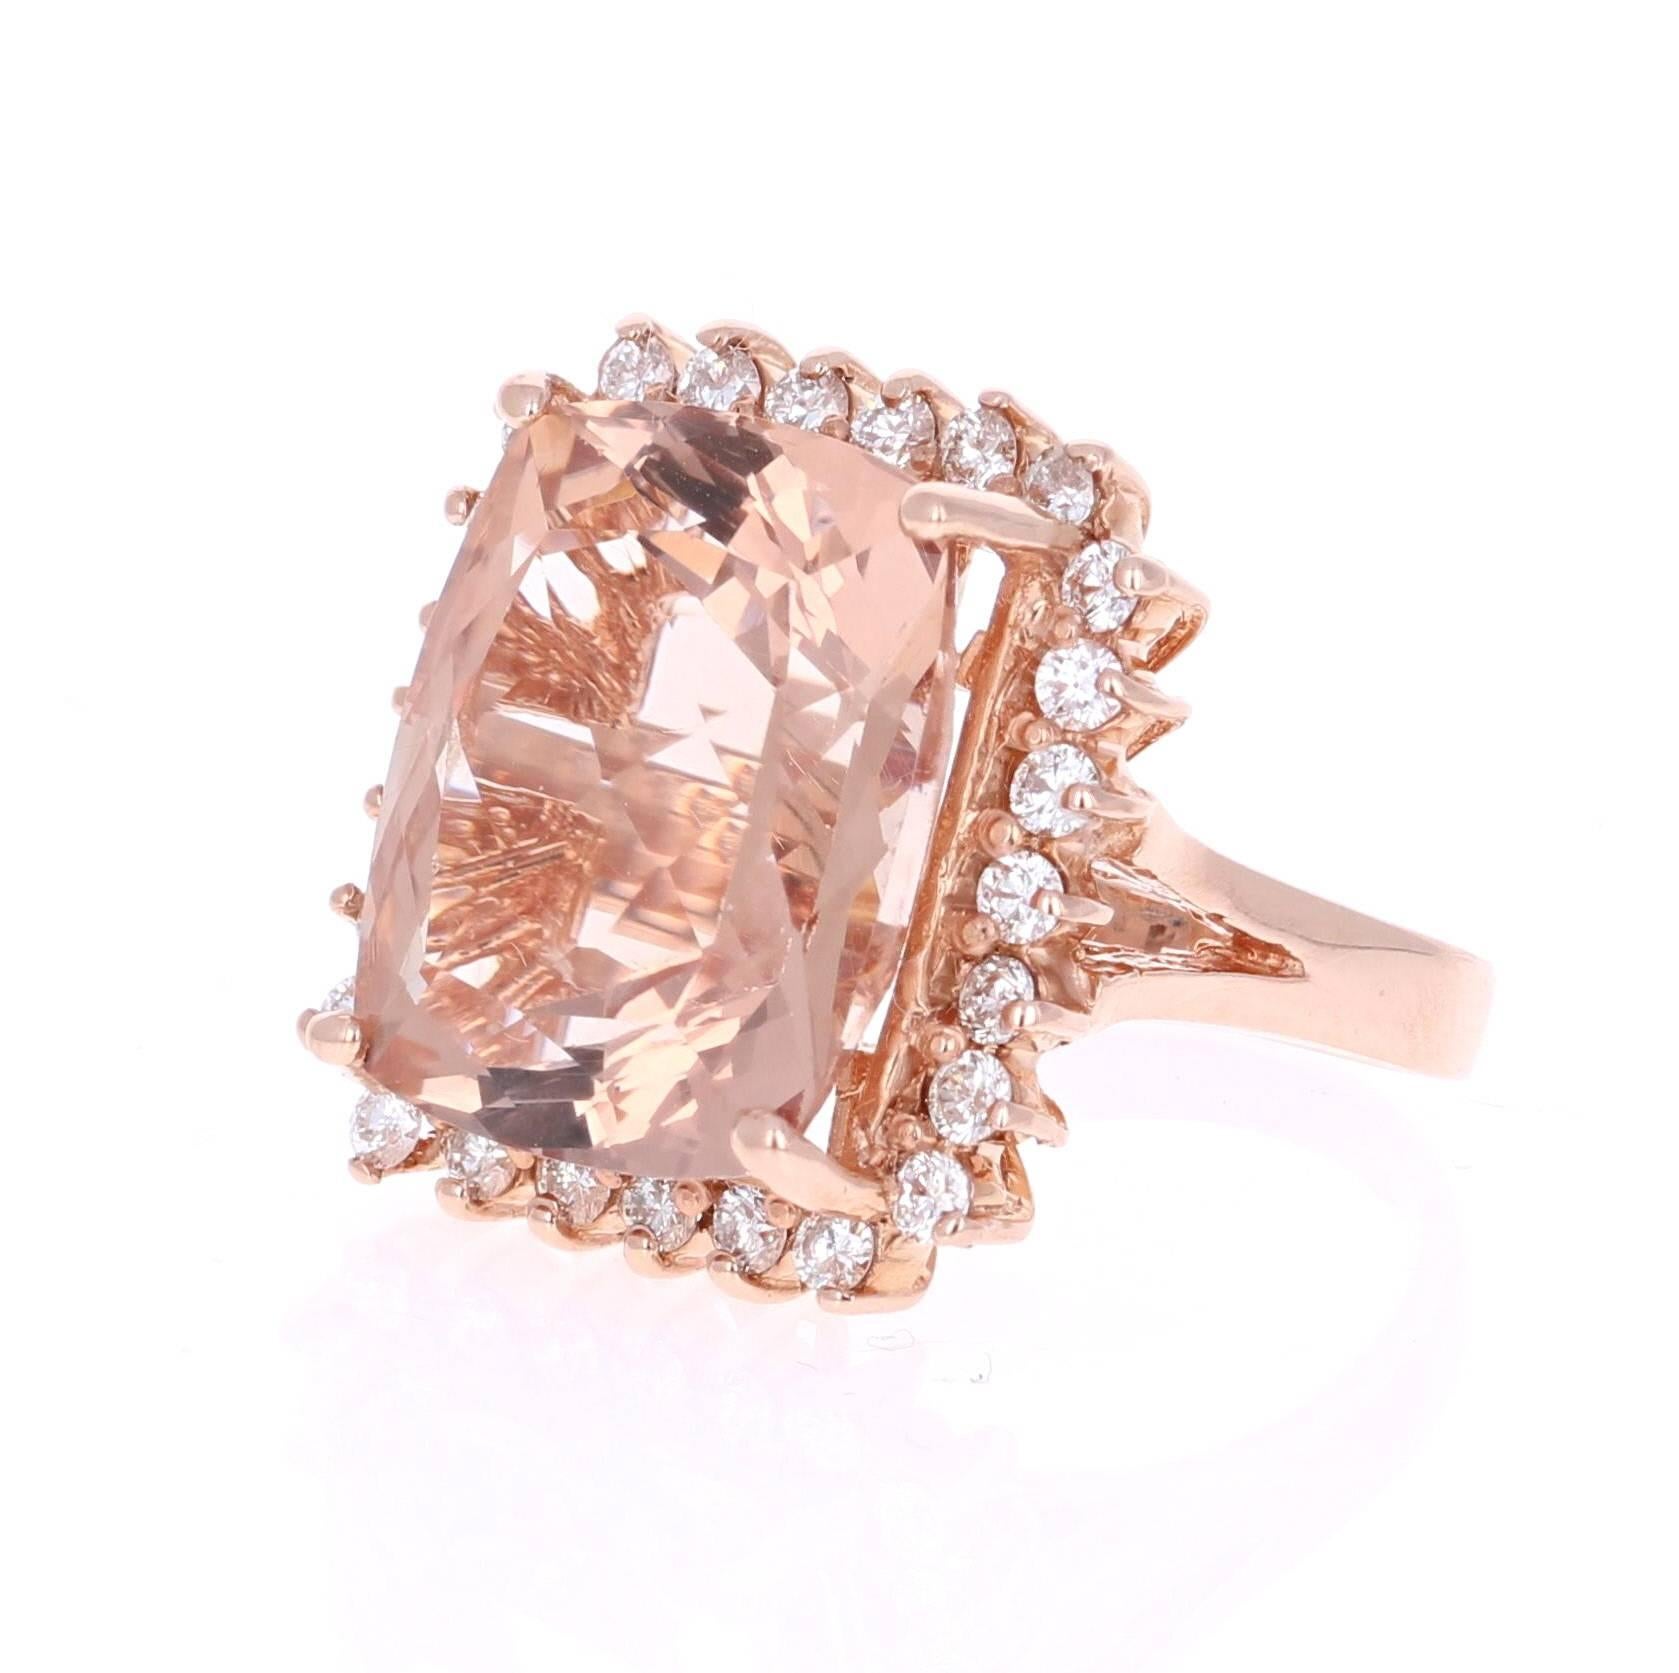 16.07 Carat Morganite Diamond Rose Gold Cocktail Ring!

This classic Morganite Ring has a large Cushion Cut 15.16  carat Morganite as its center and is surrounded by 26 Round Cut Diamonds that weigh 0.91 carats. The clarity and color of the diamonds